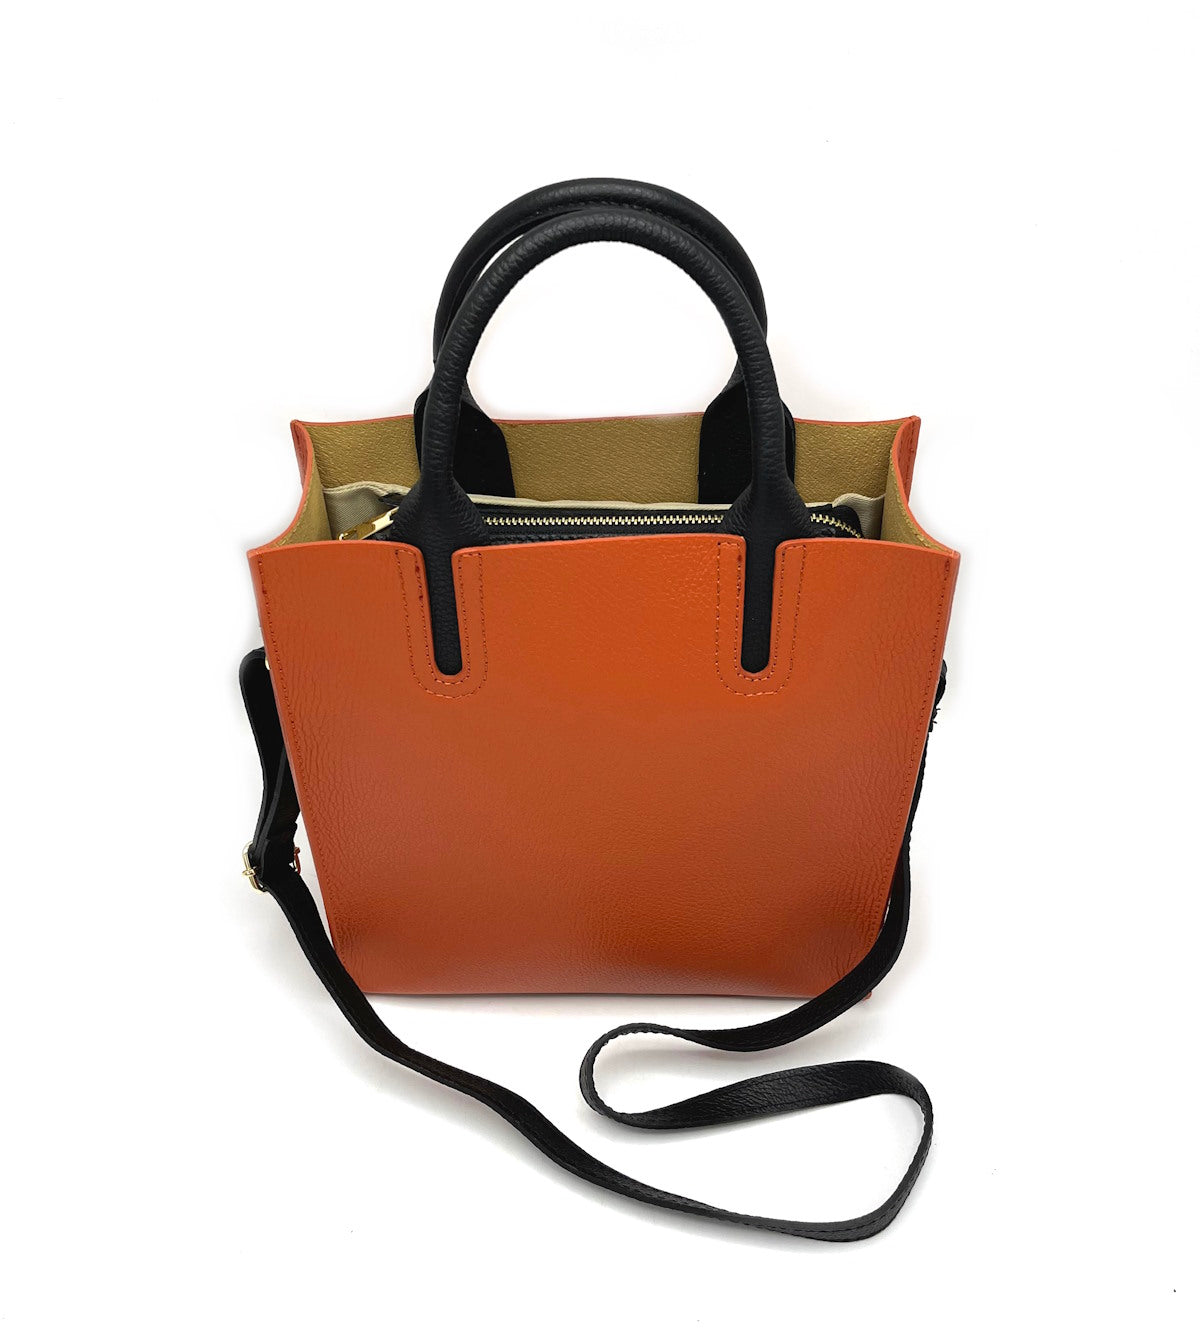 Genuine leather shoulder bag, for women, made in Italy, art. 112445